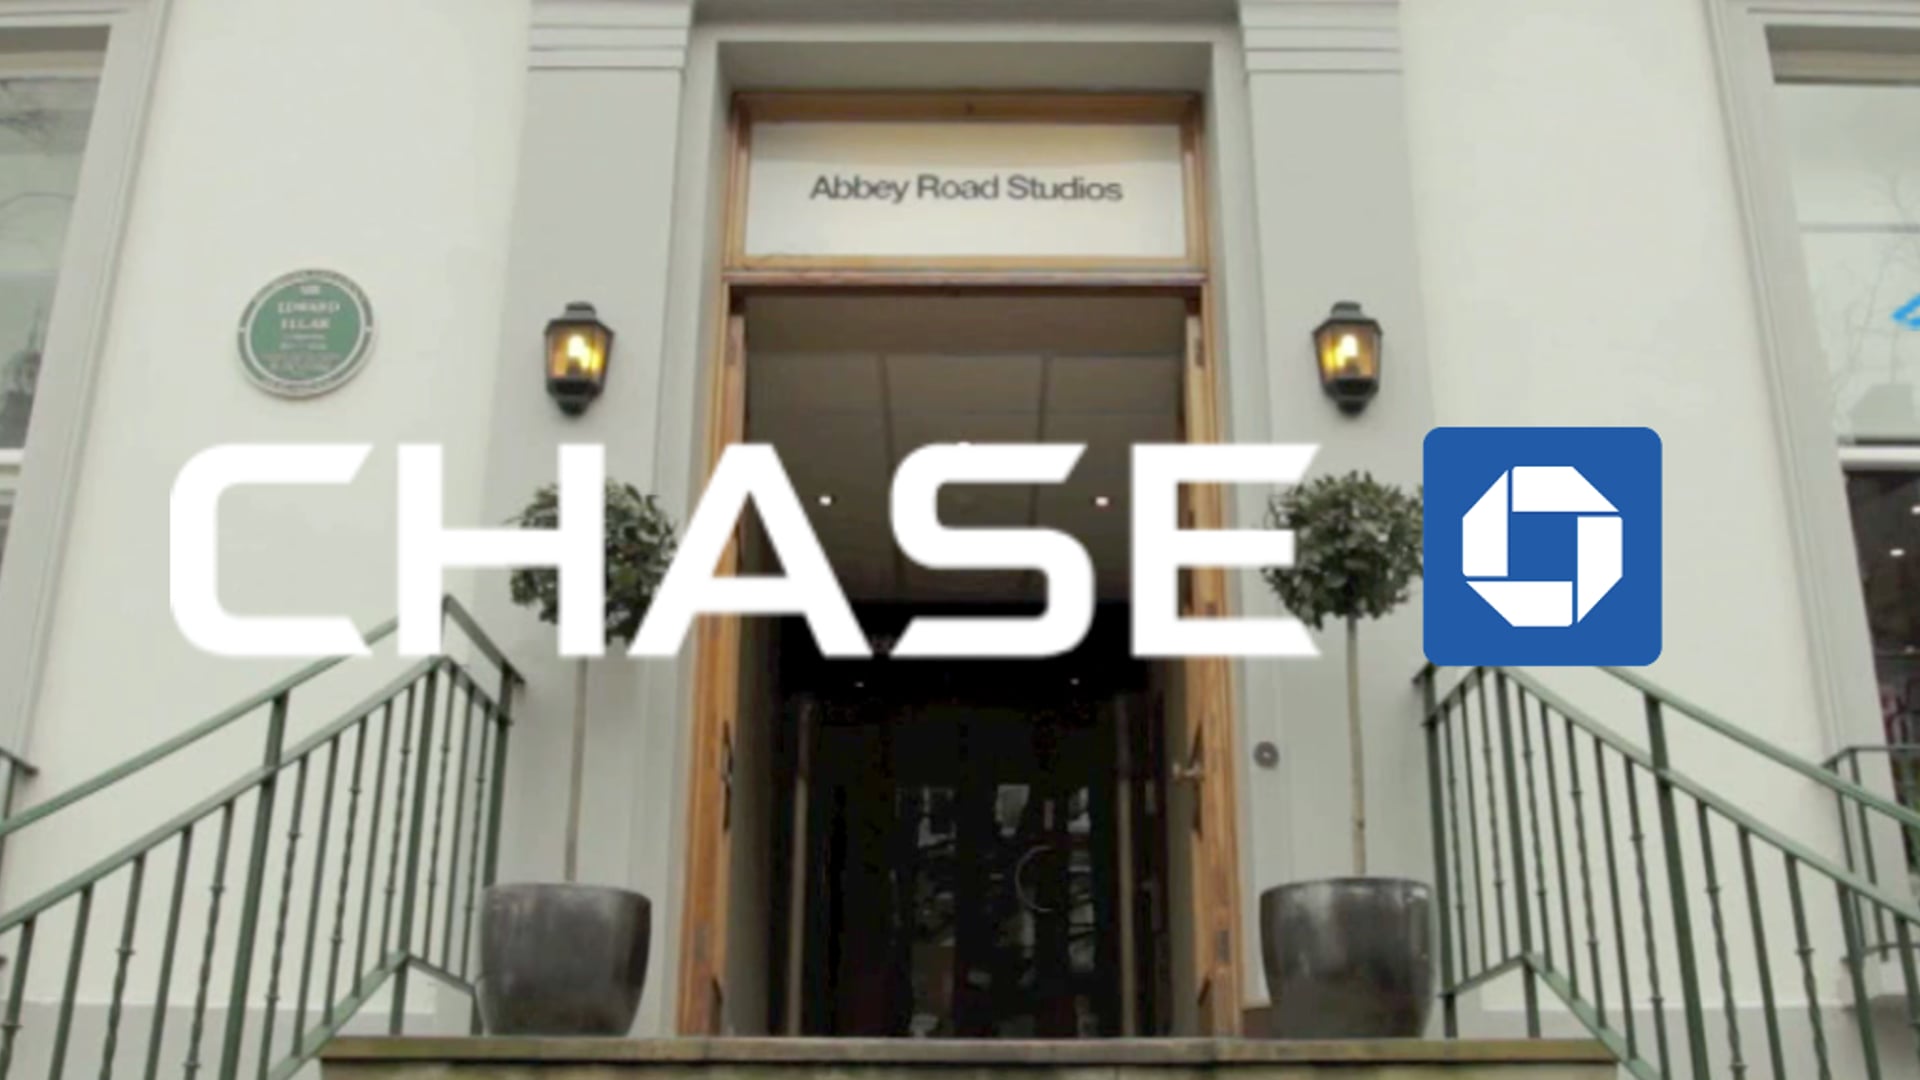 JP MORGAN CHASE global rebrand with London Symphony Orchestra